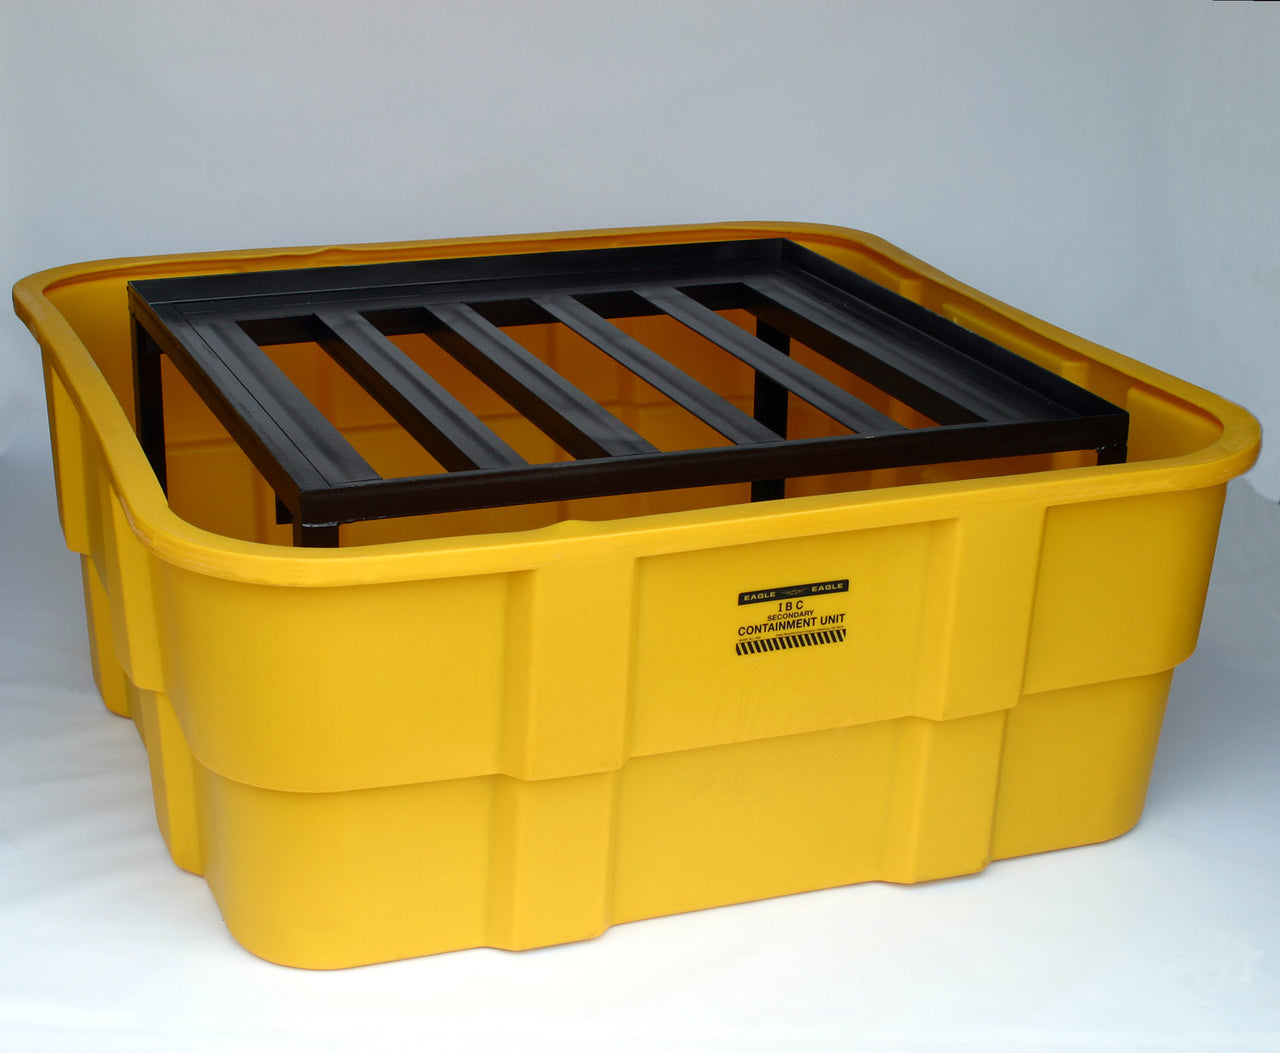 Eagle All-Poly IBC Spill Containment Unit